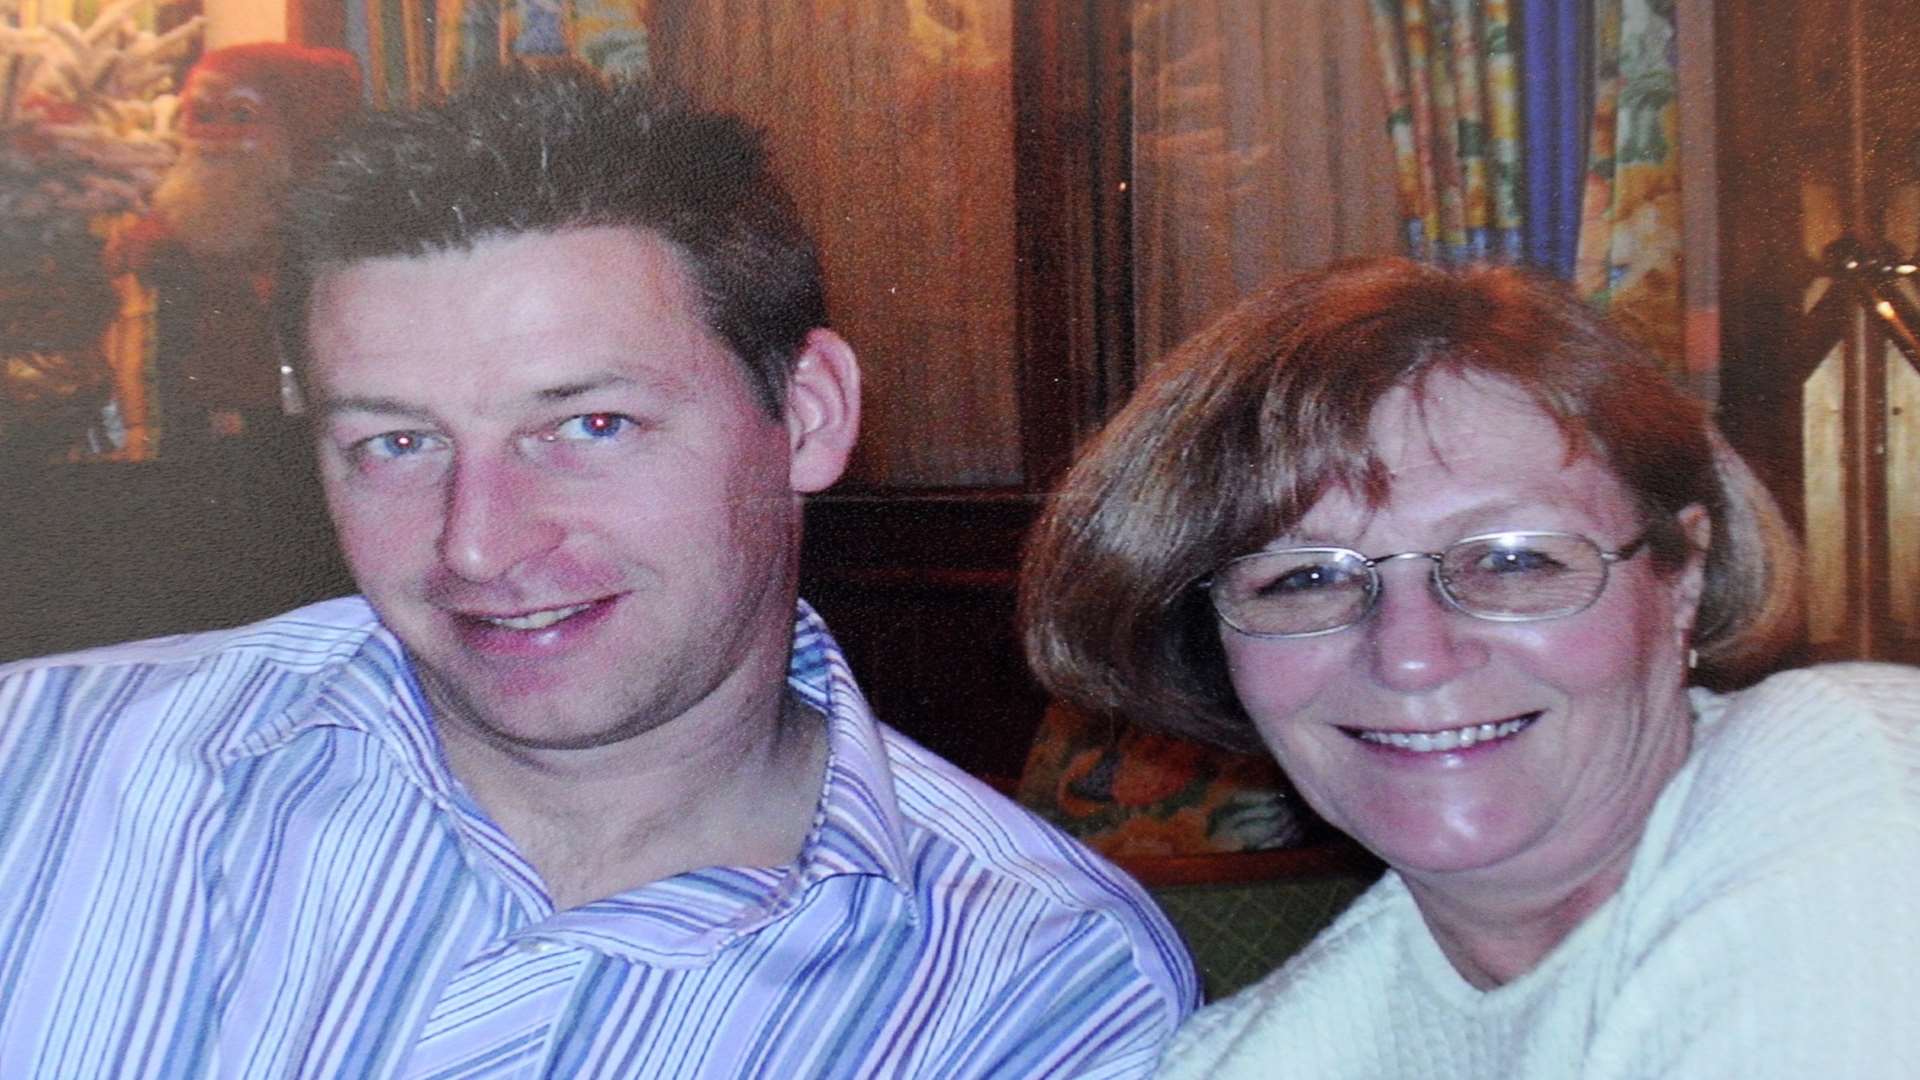 Colin Payne, who died after being punched by his stepson, with his mother Brenda